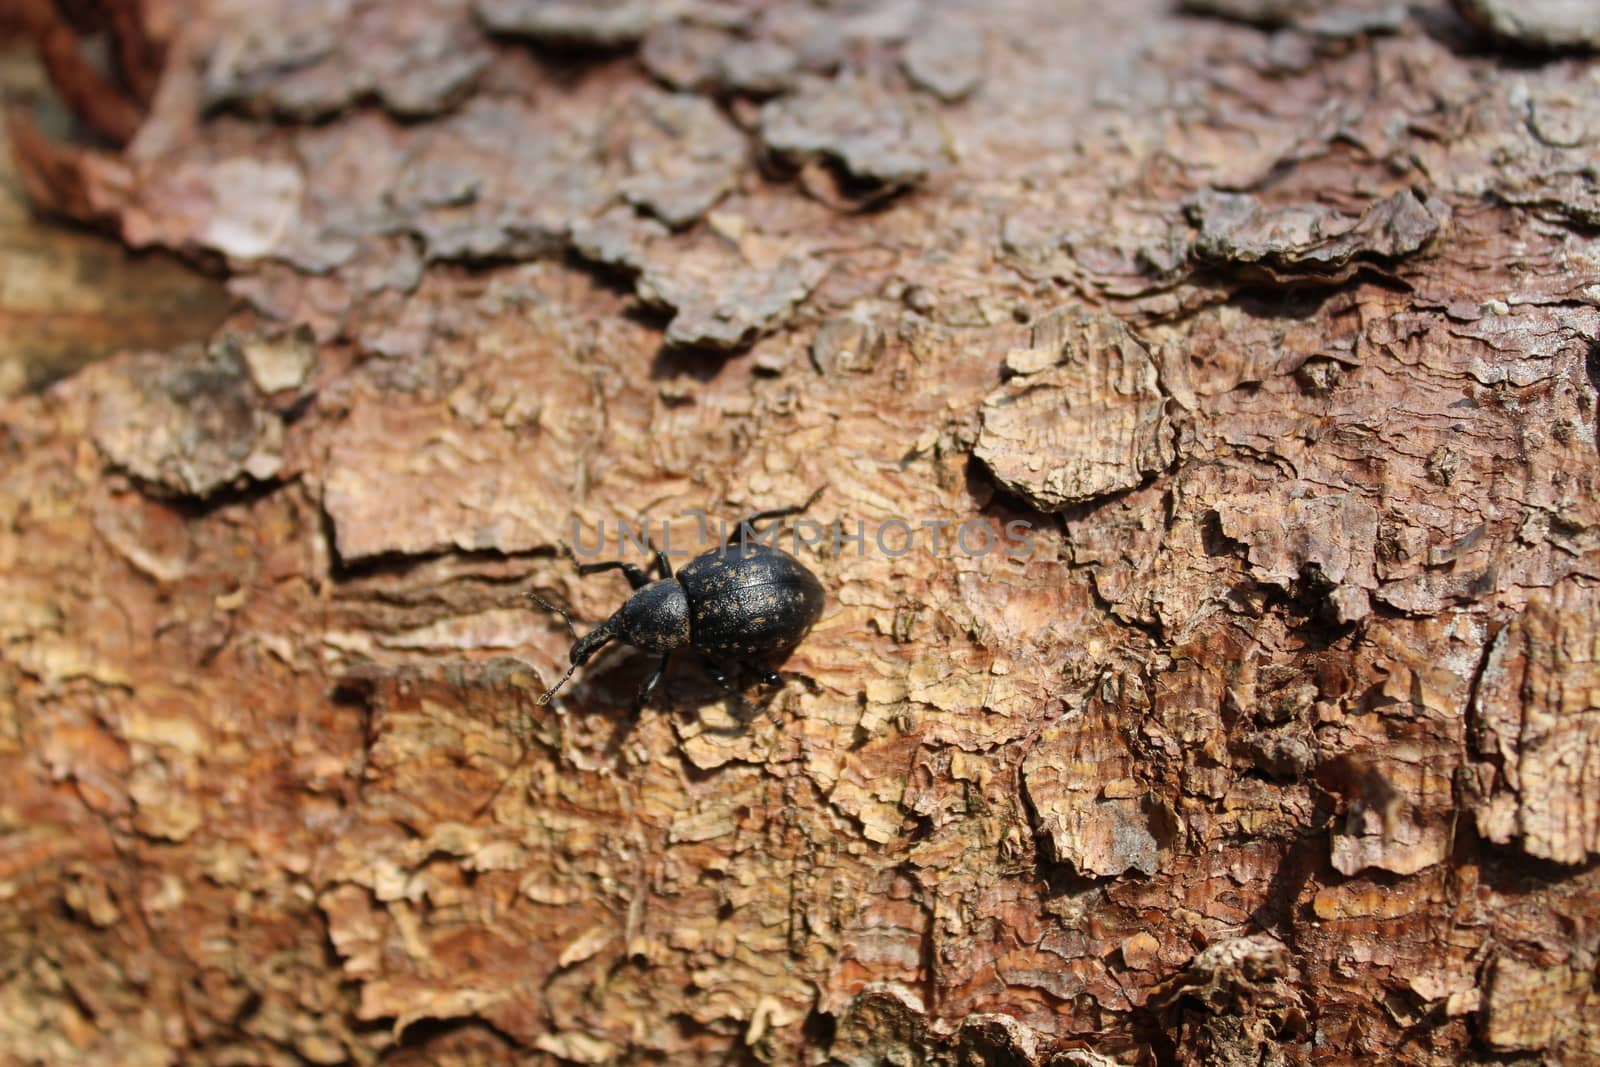 The picture shows a weevil on a bark in the forest